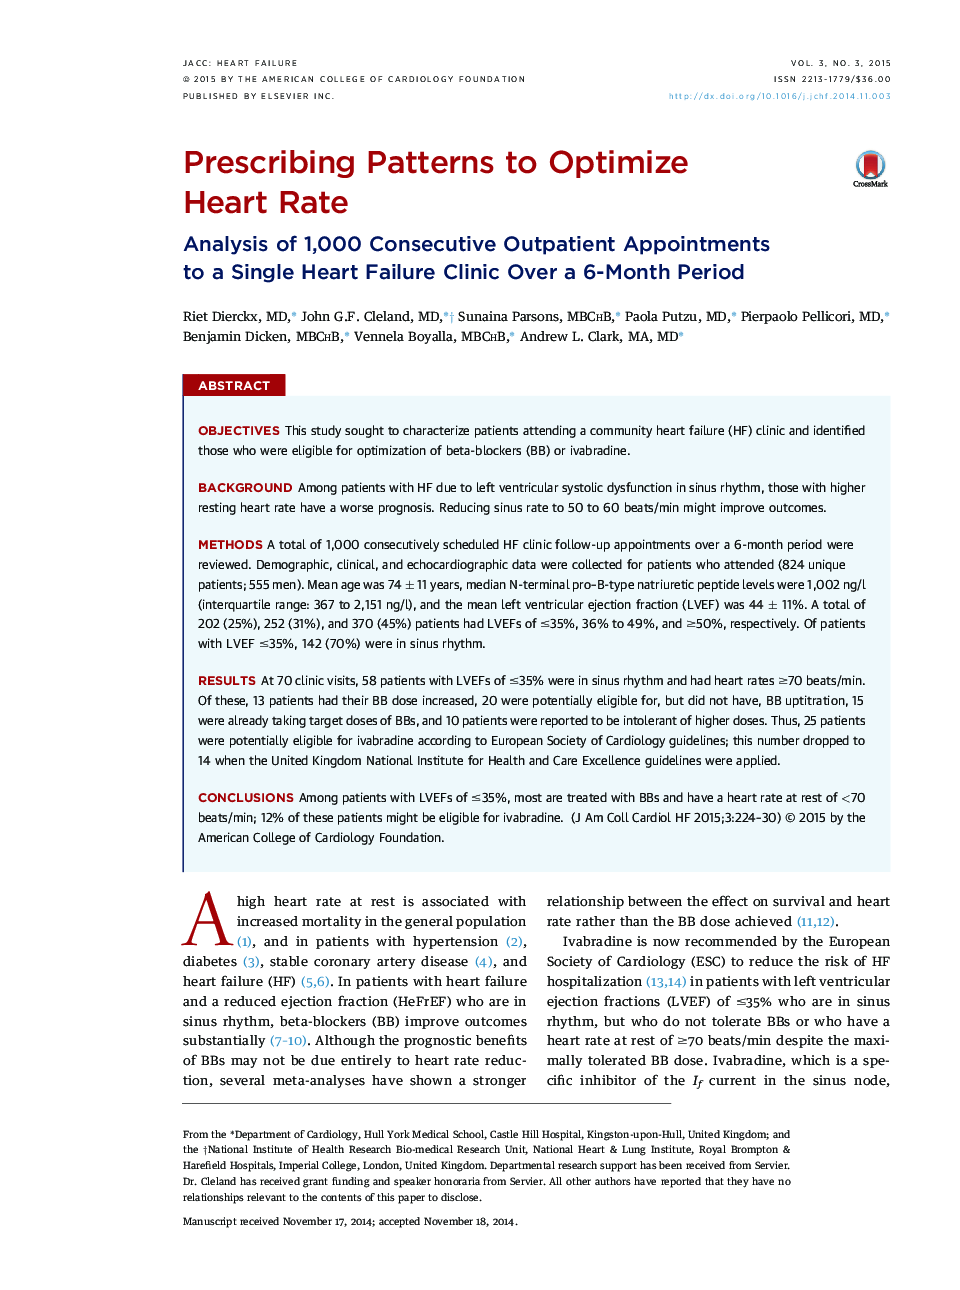 Prescribing Patterns to Optimize Heart Rate : Analysis of 1,000 Consecutive Outpatient Appointments to a Single Heart Failure Clinic Over a 6-Month Period